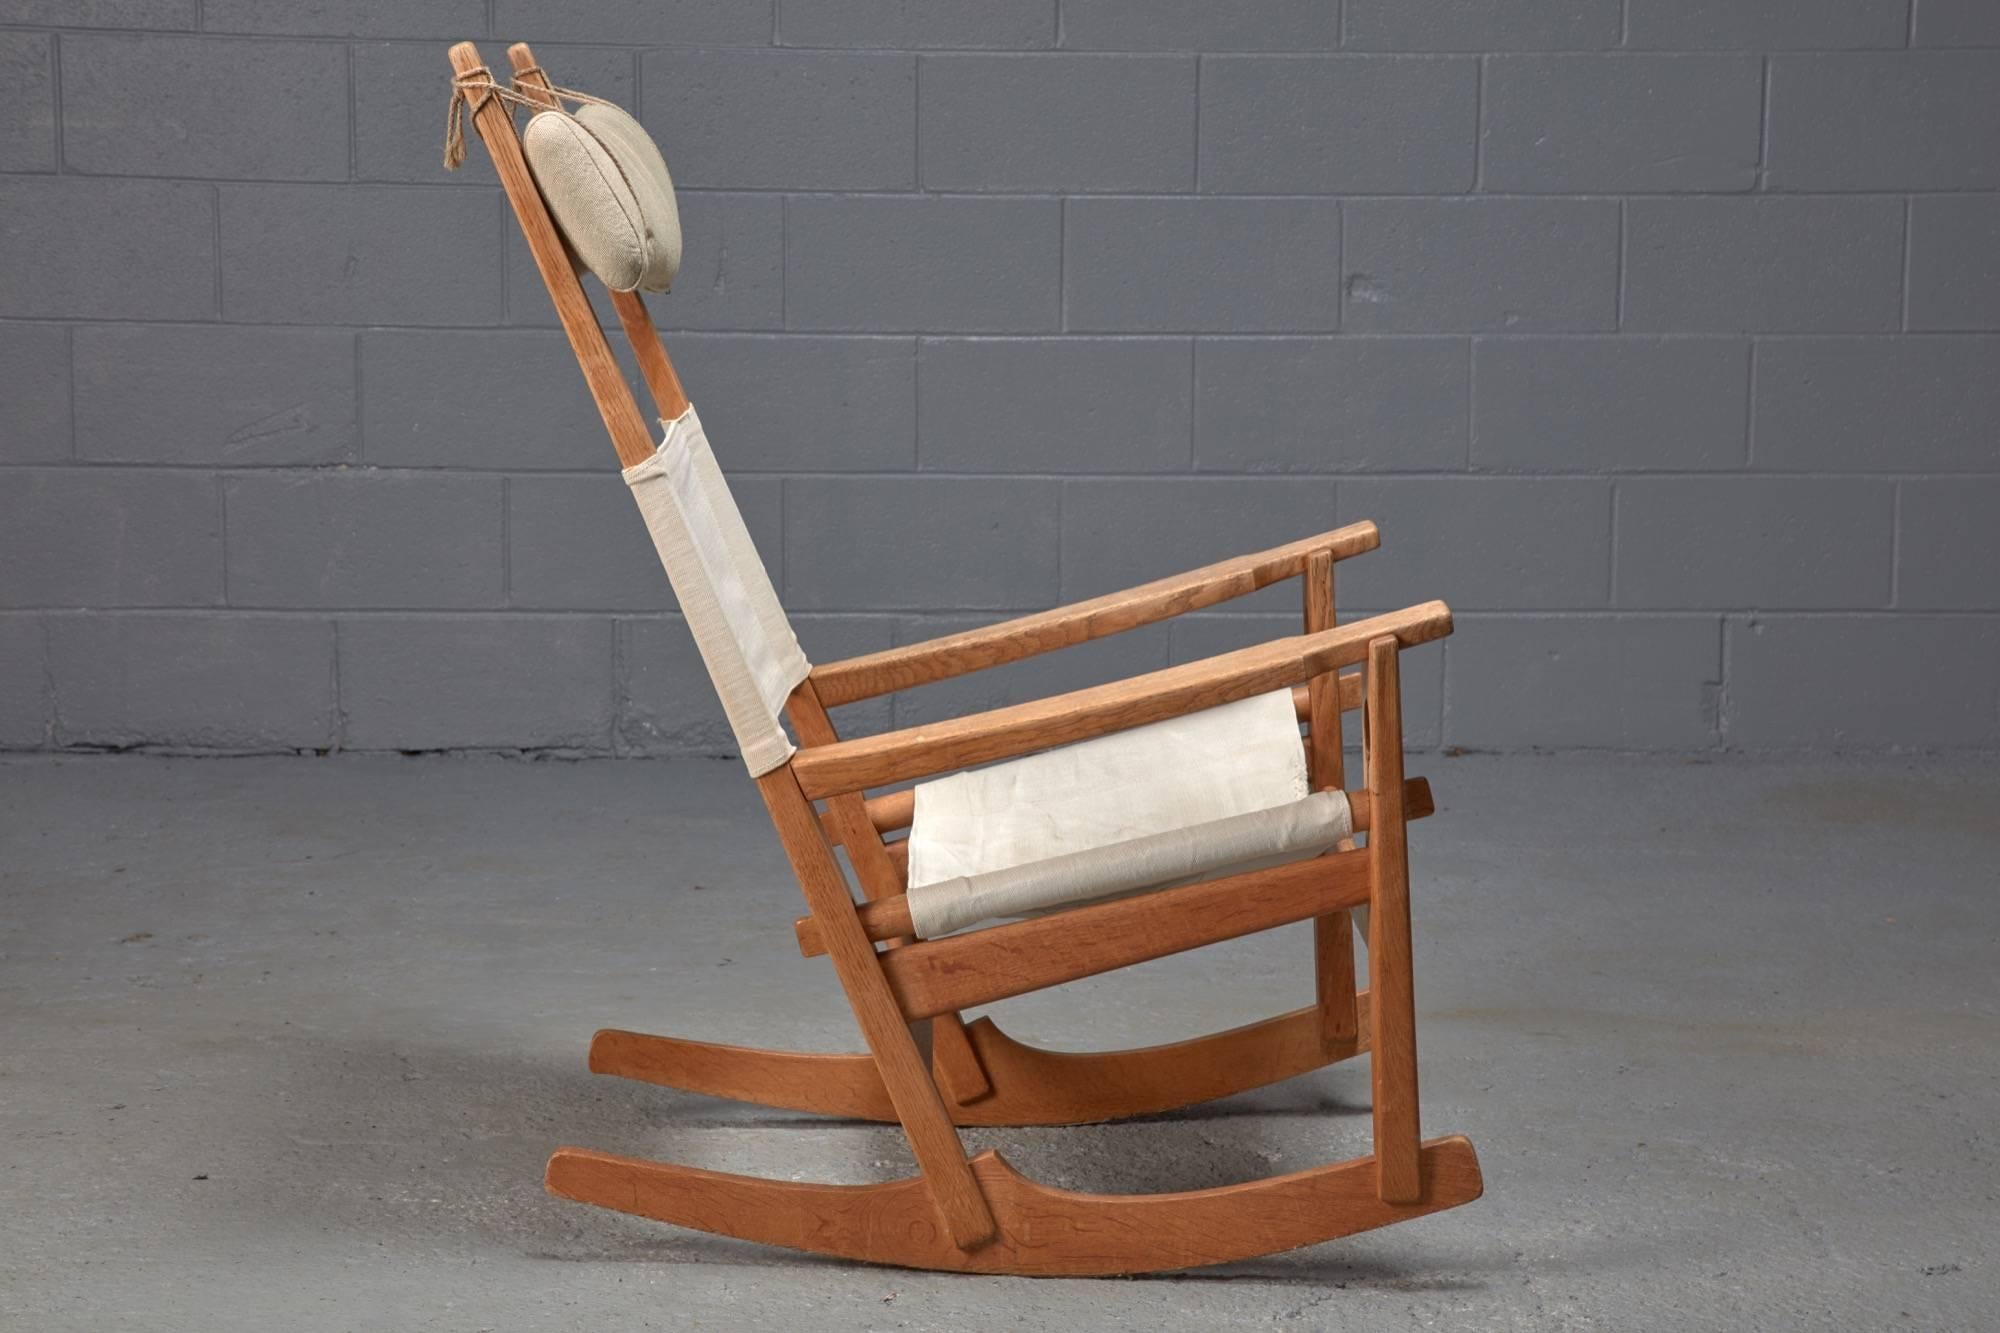 Designed by Hans Wegner, the keyhole rocking chair is easily distinguishable through oak frame and its keyhole-shaped joinery. The seat and back are made of woven fabric, and a head cushion is designated to provide additional comfort.